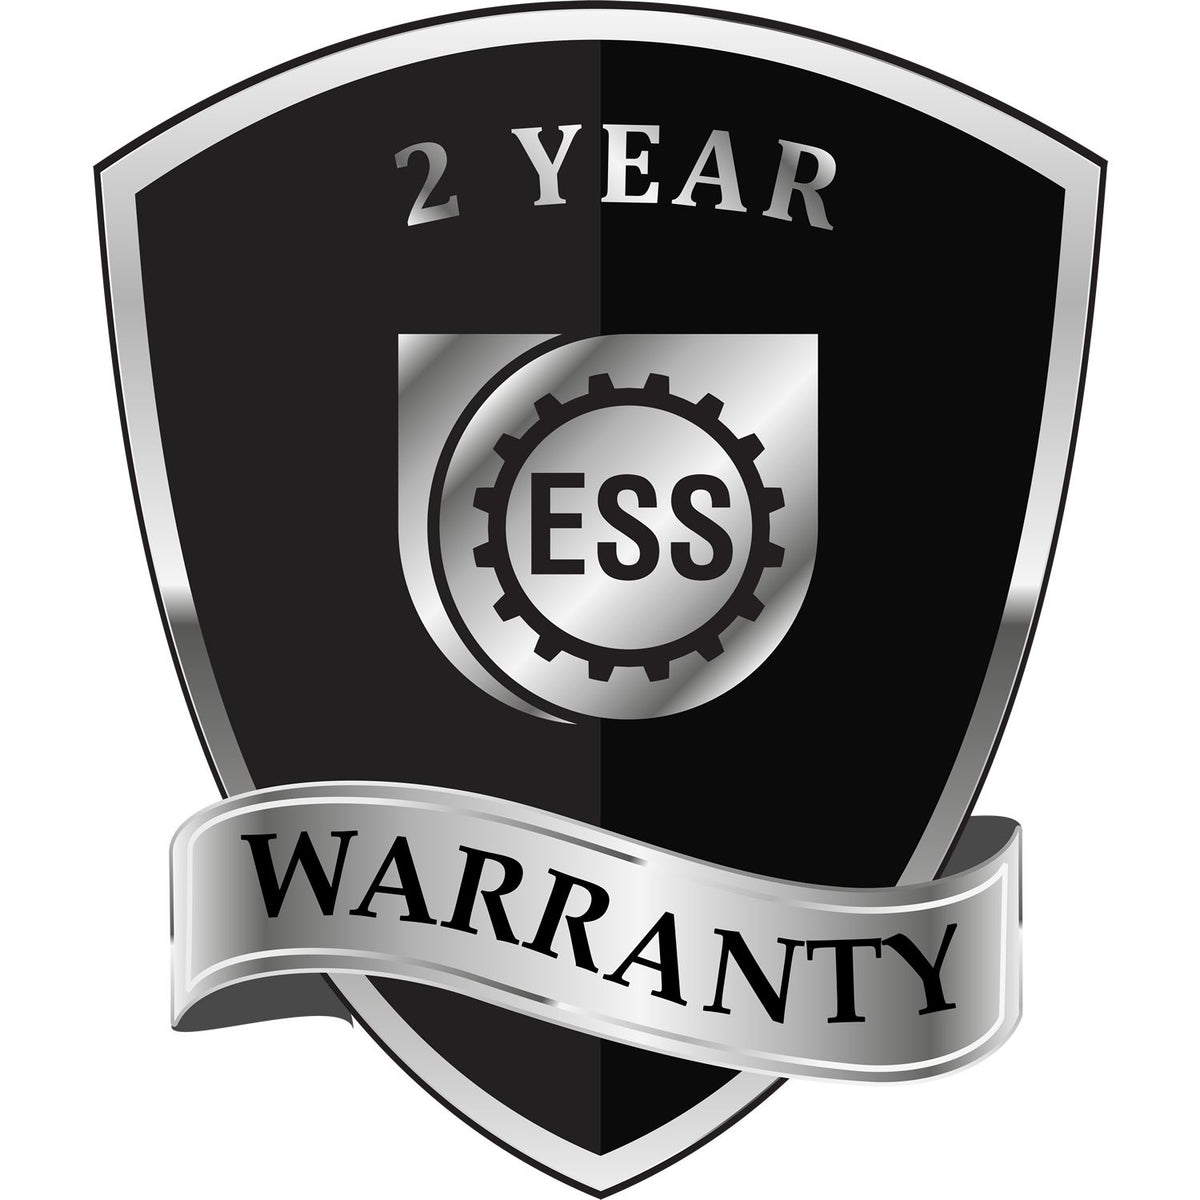 A black and silver badge or emblem showing warranty information for the Gift Vermont Architect Seal